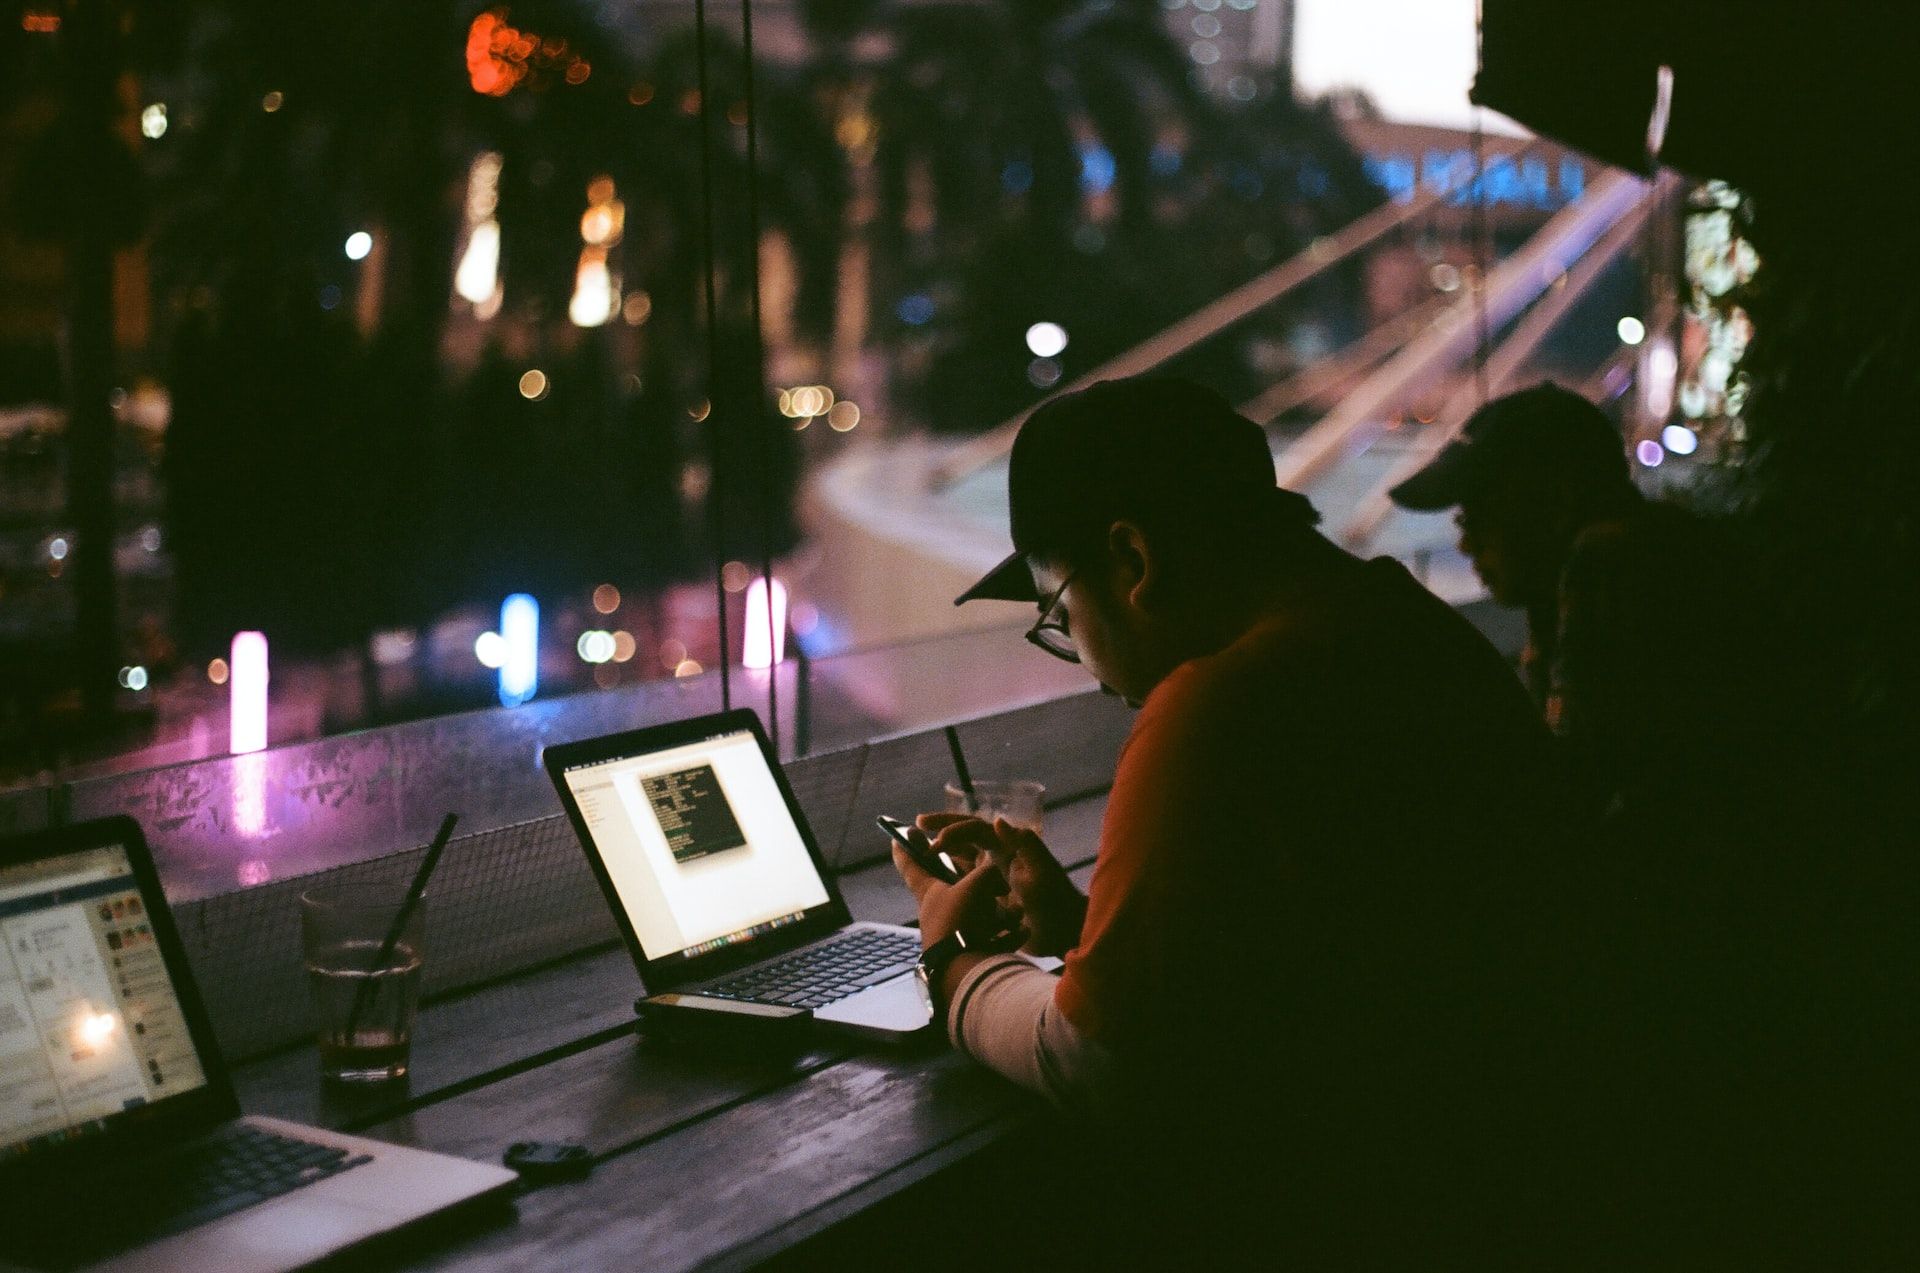 Image showing a person on a laptop and mobile phone in the dark